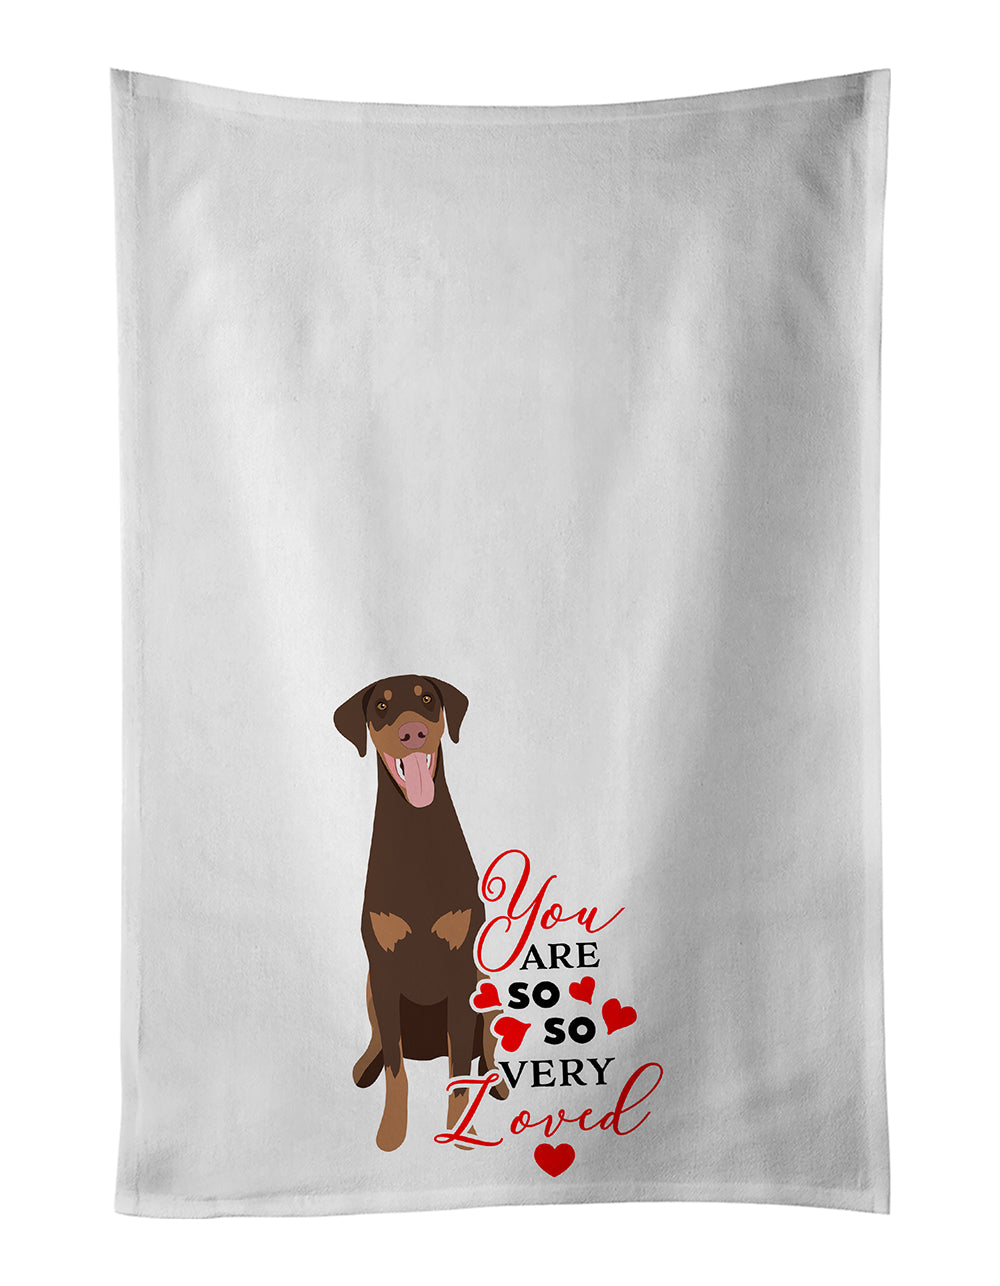 Buy this Doberman Pinscher Red and Rust Natural Ears #1 so Loved White Kitchen Towel Set of 2